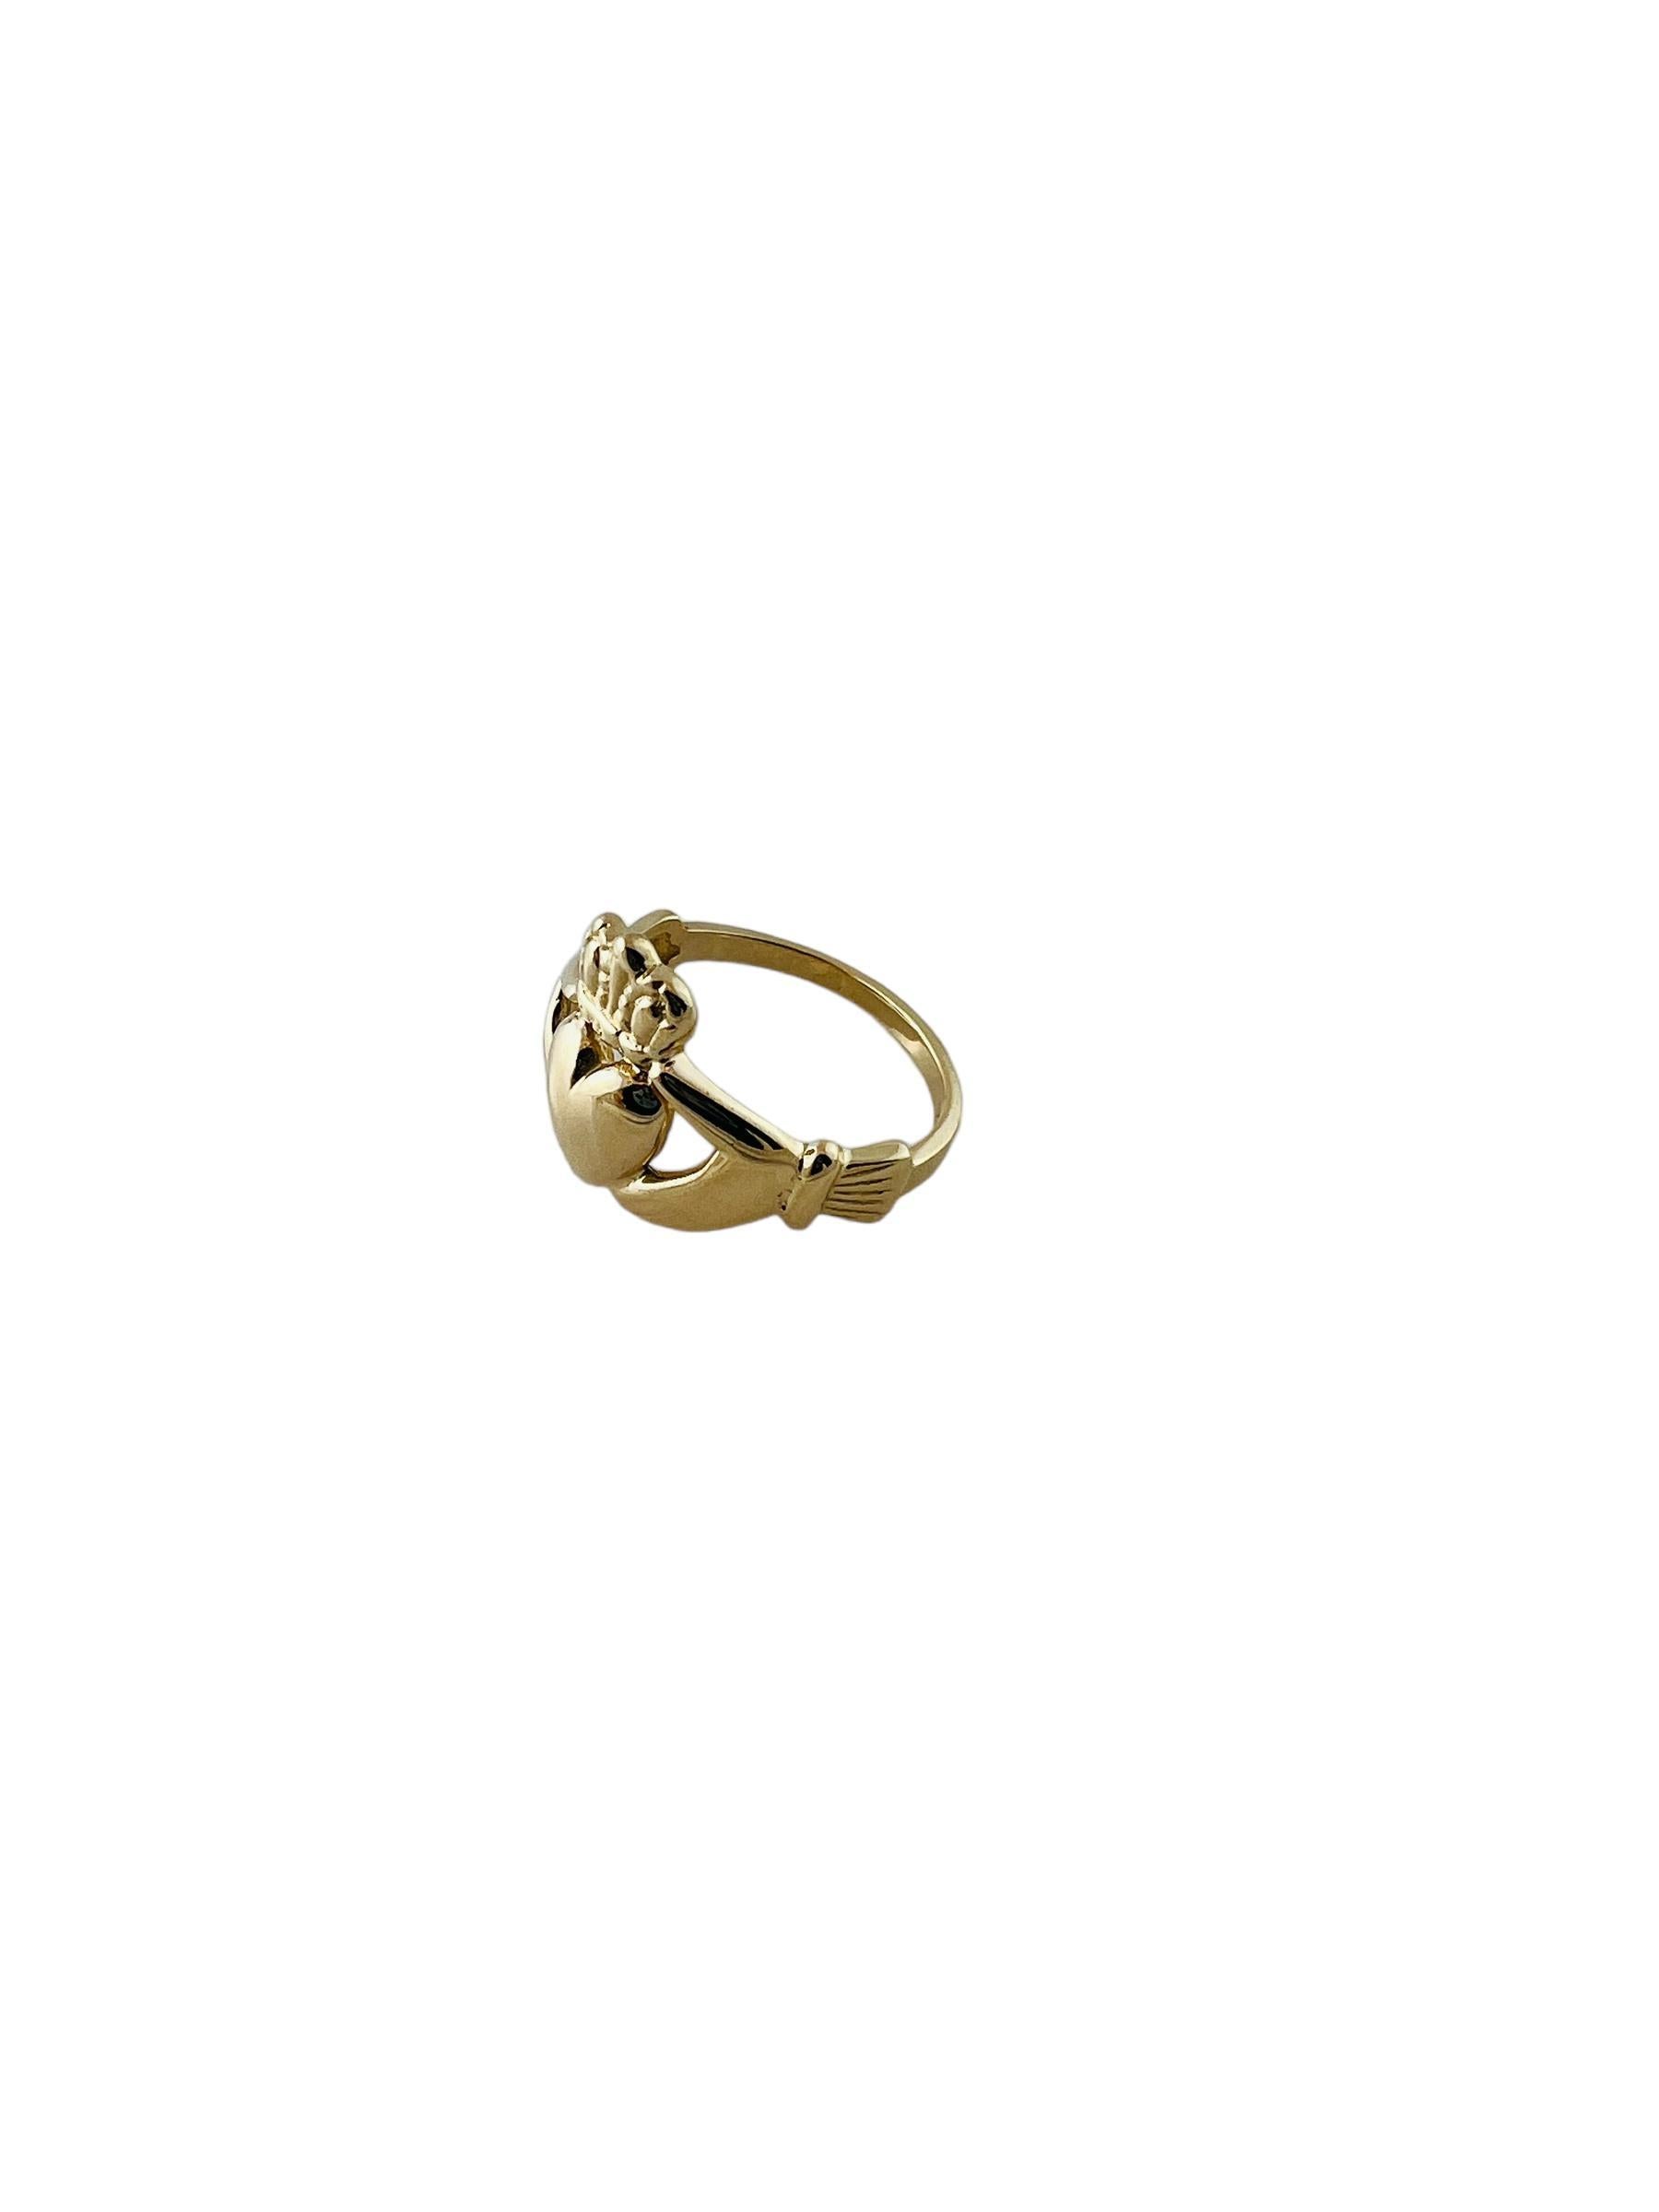 14K Yellow Gold Irish Claddagh Ring Size 6 #15618 In Good Condition For Sale In Washington Depot, CT